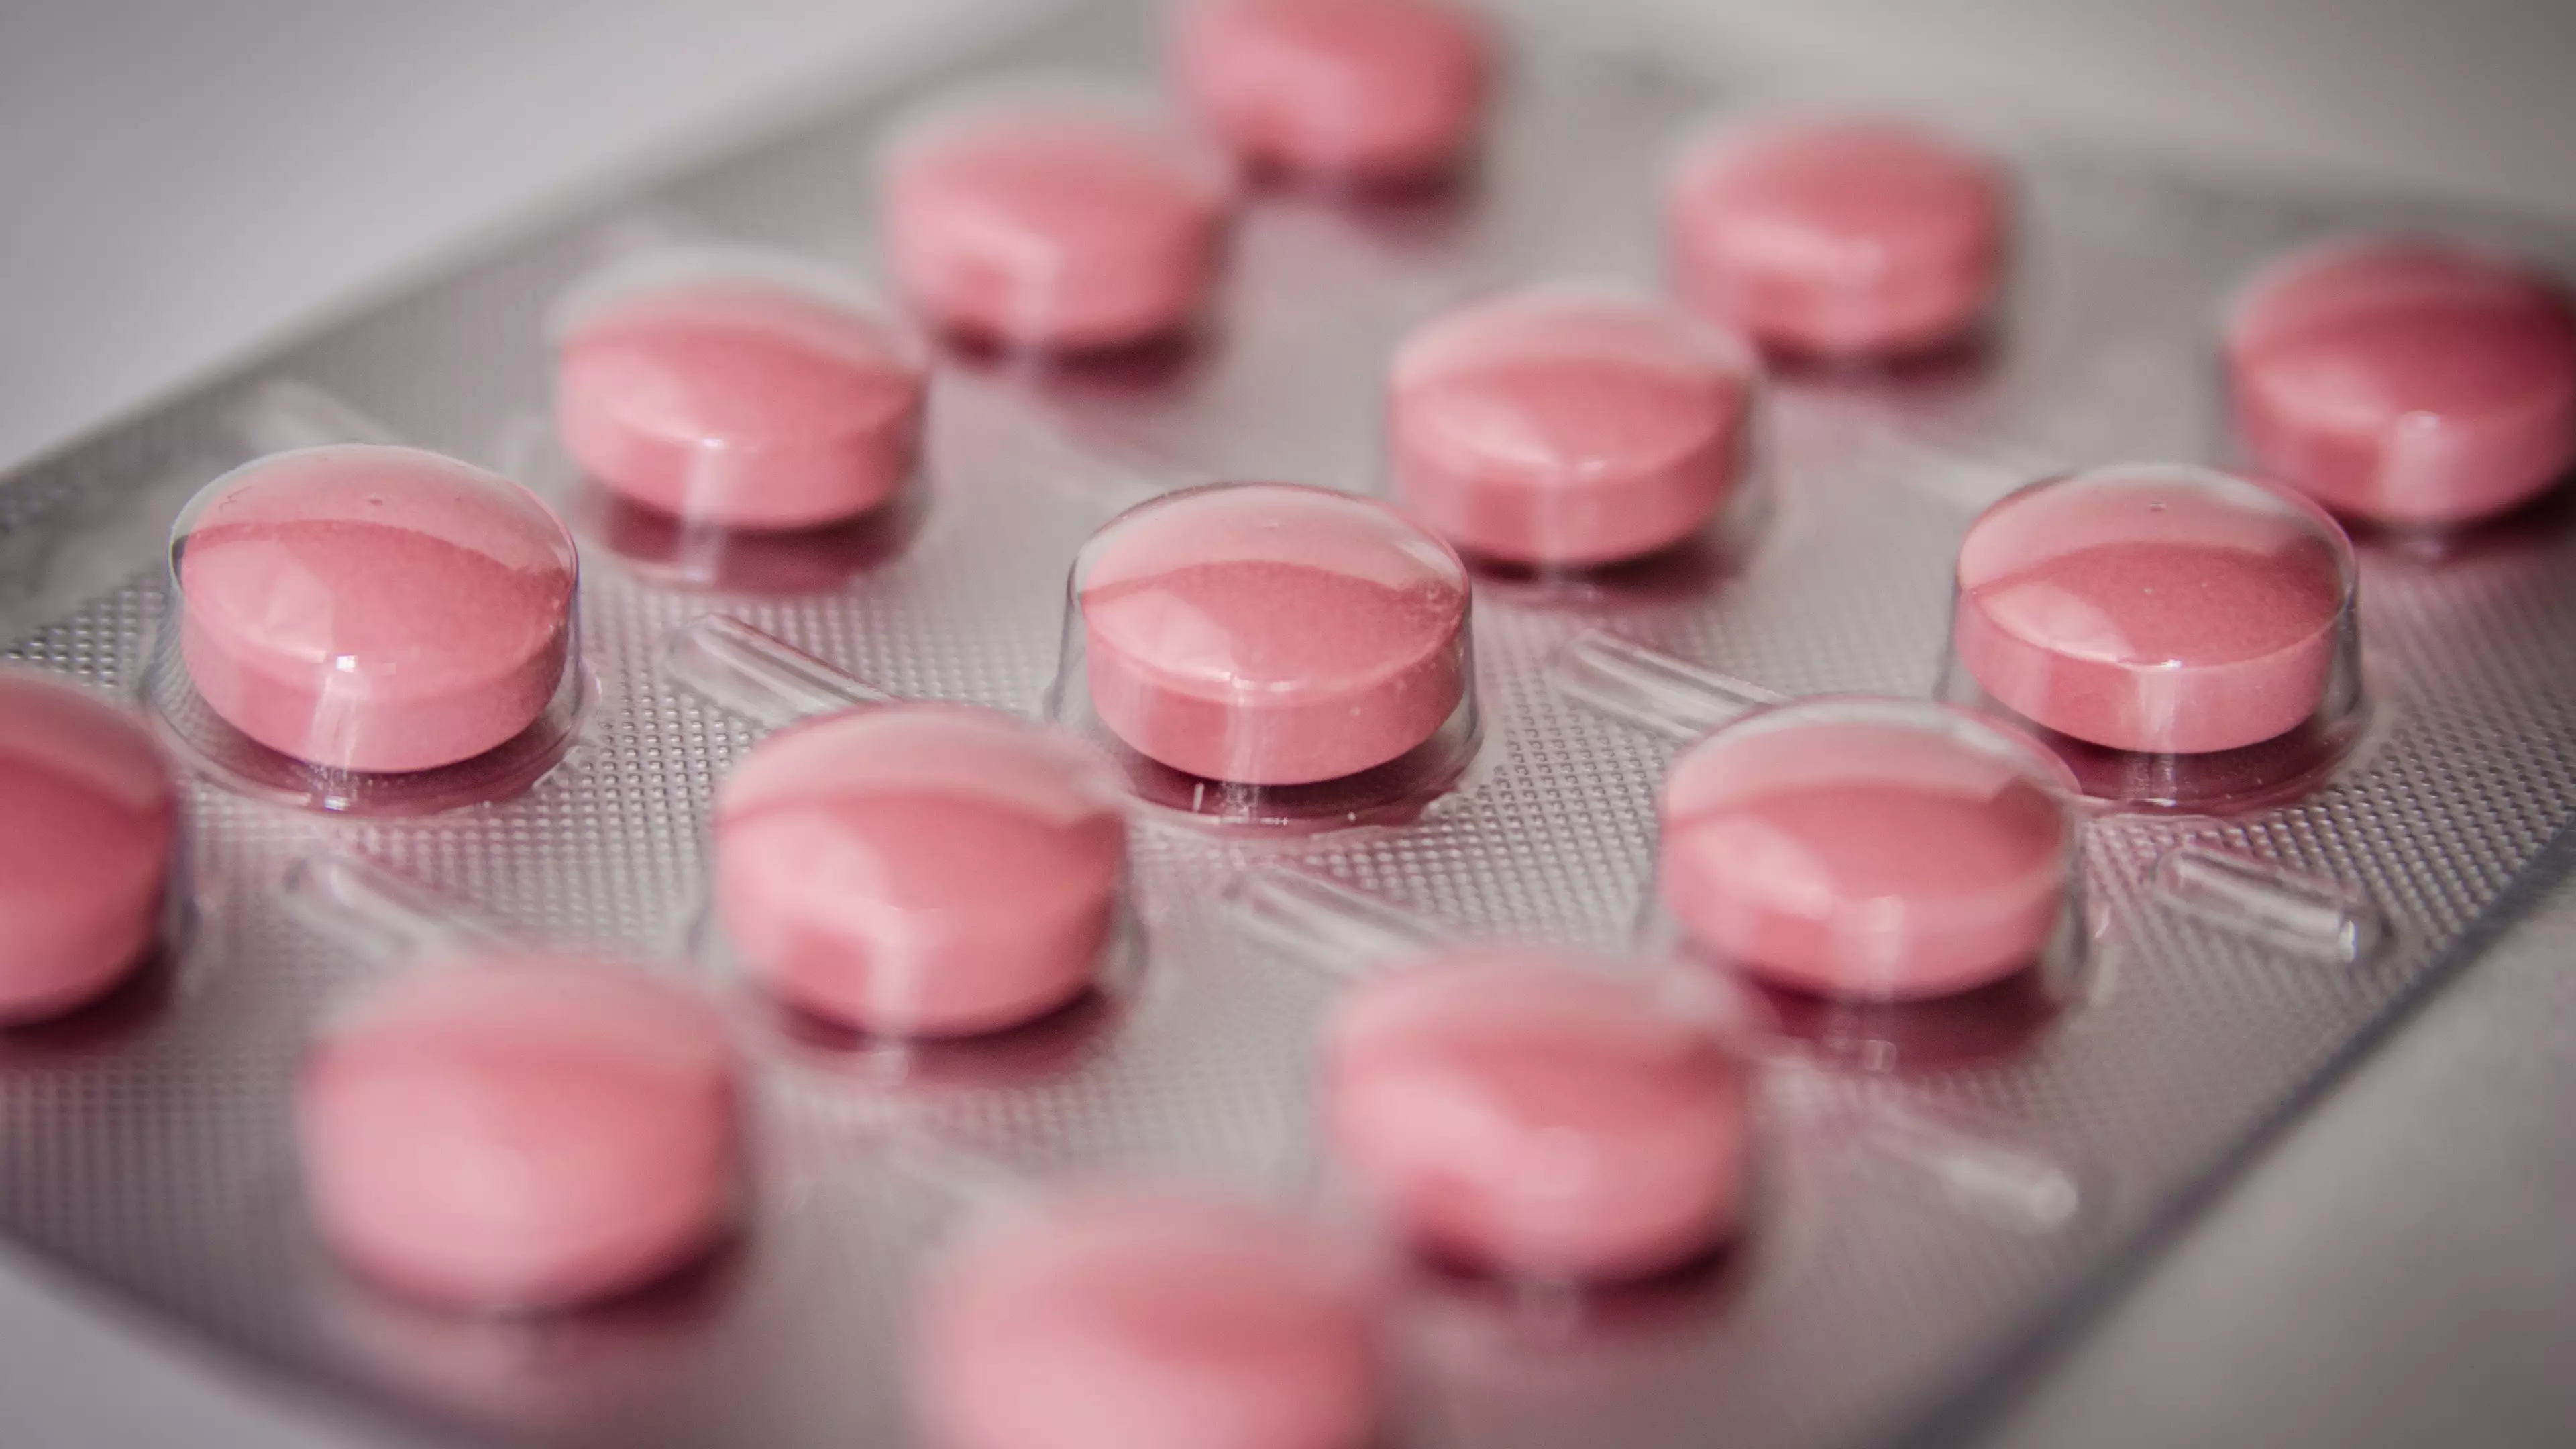 Half Of Men Say They Wouldn’t Want To Take A Male Birth Control Pill 